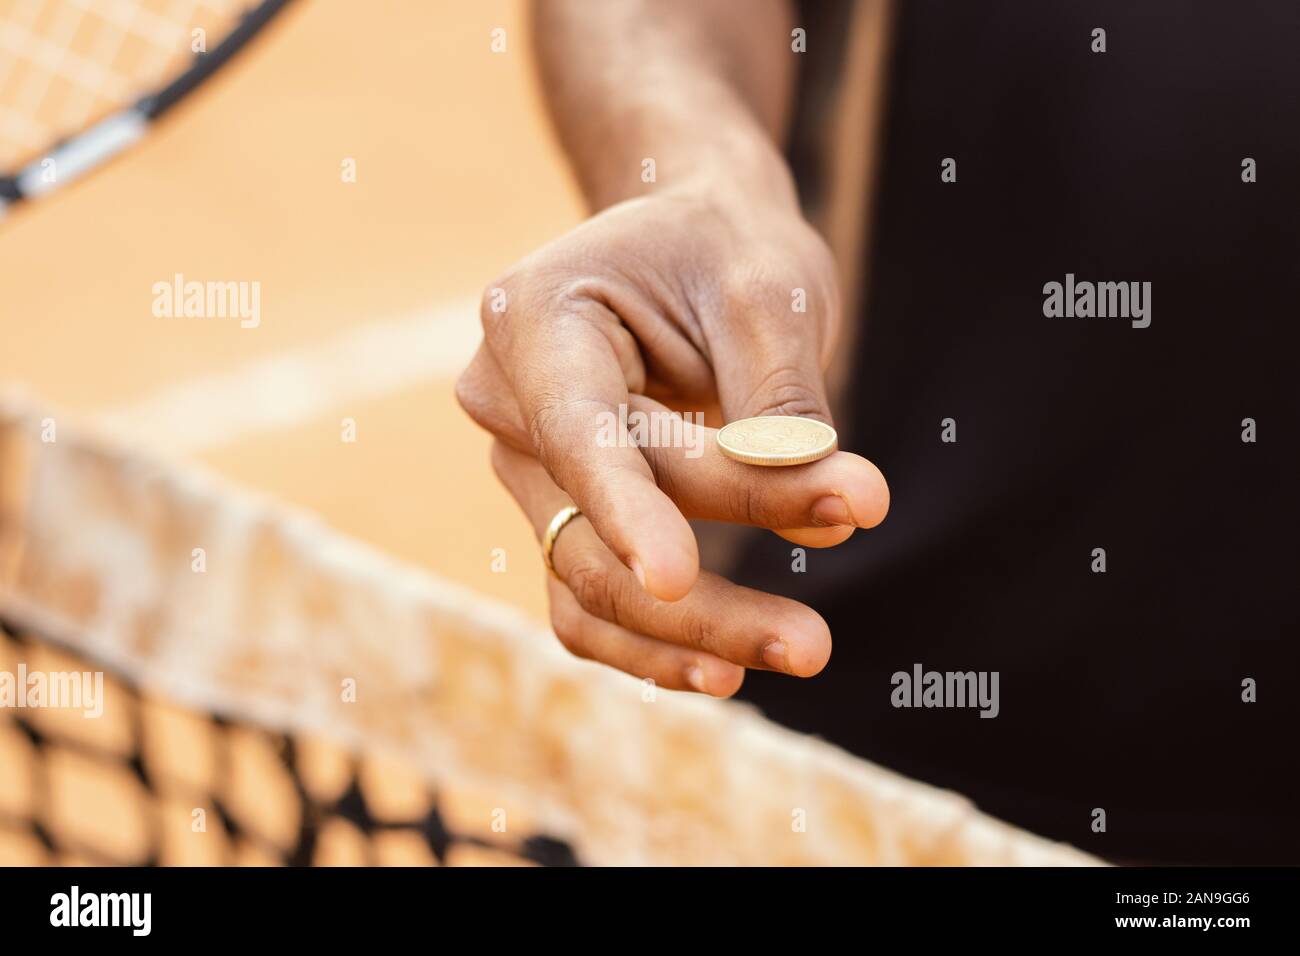 Close up of referee hands flipping a coin before starting the game or match. Stock Photo